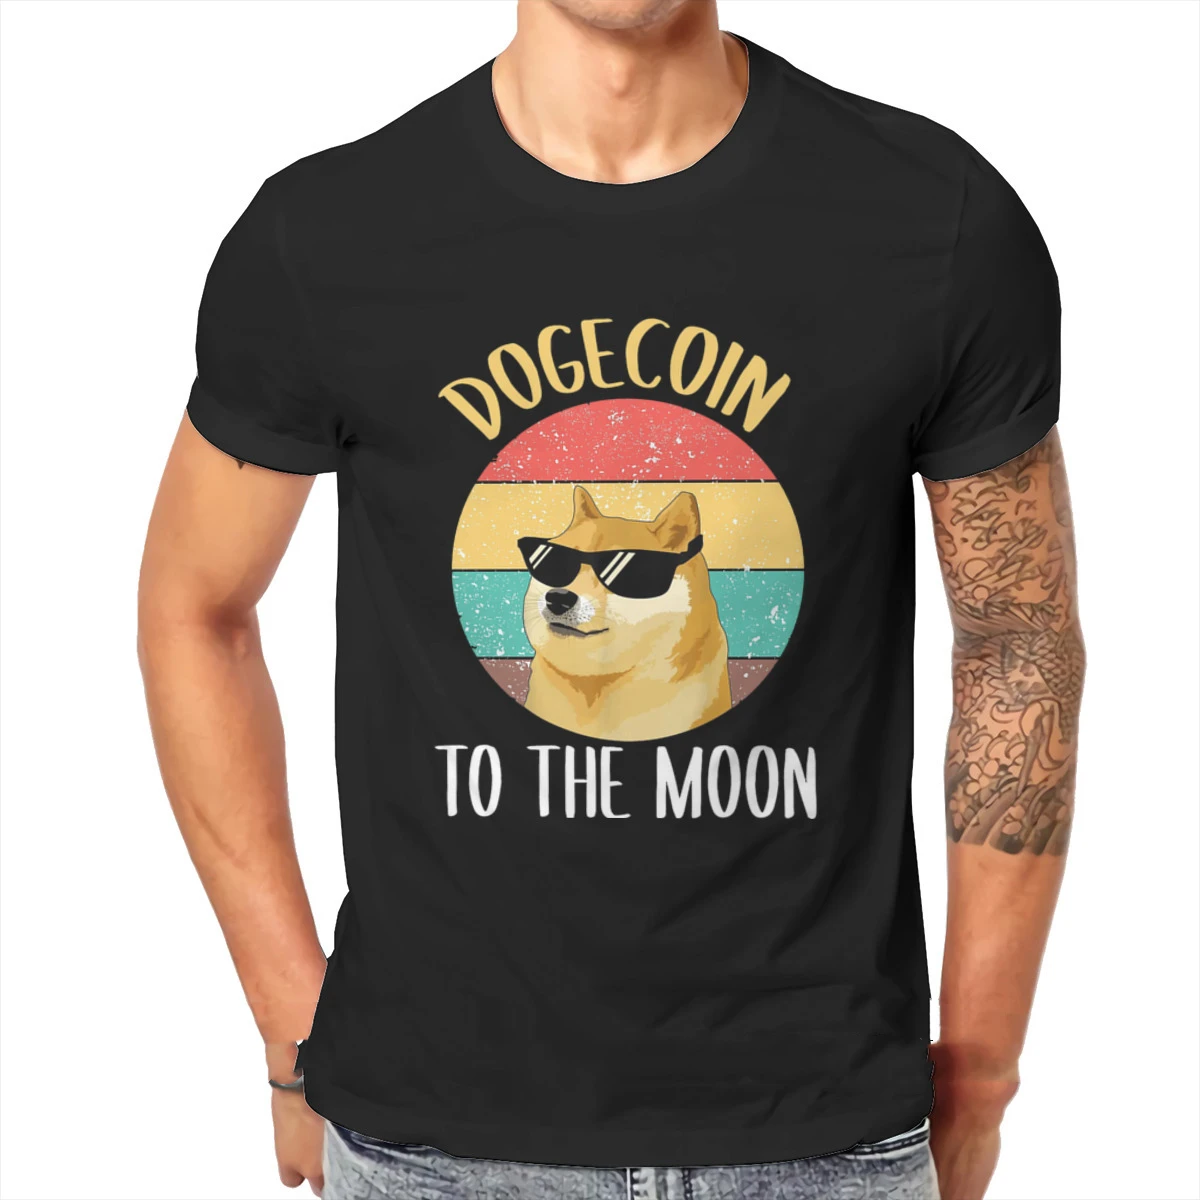 

Bitcoin Cryptocurrency Art Dogecoin To The Moon Classic T Shirt Vintage Loose Cotton Men's Tops Harajuku Crewneck TShirt, Picture shows